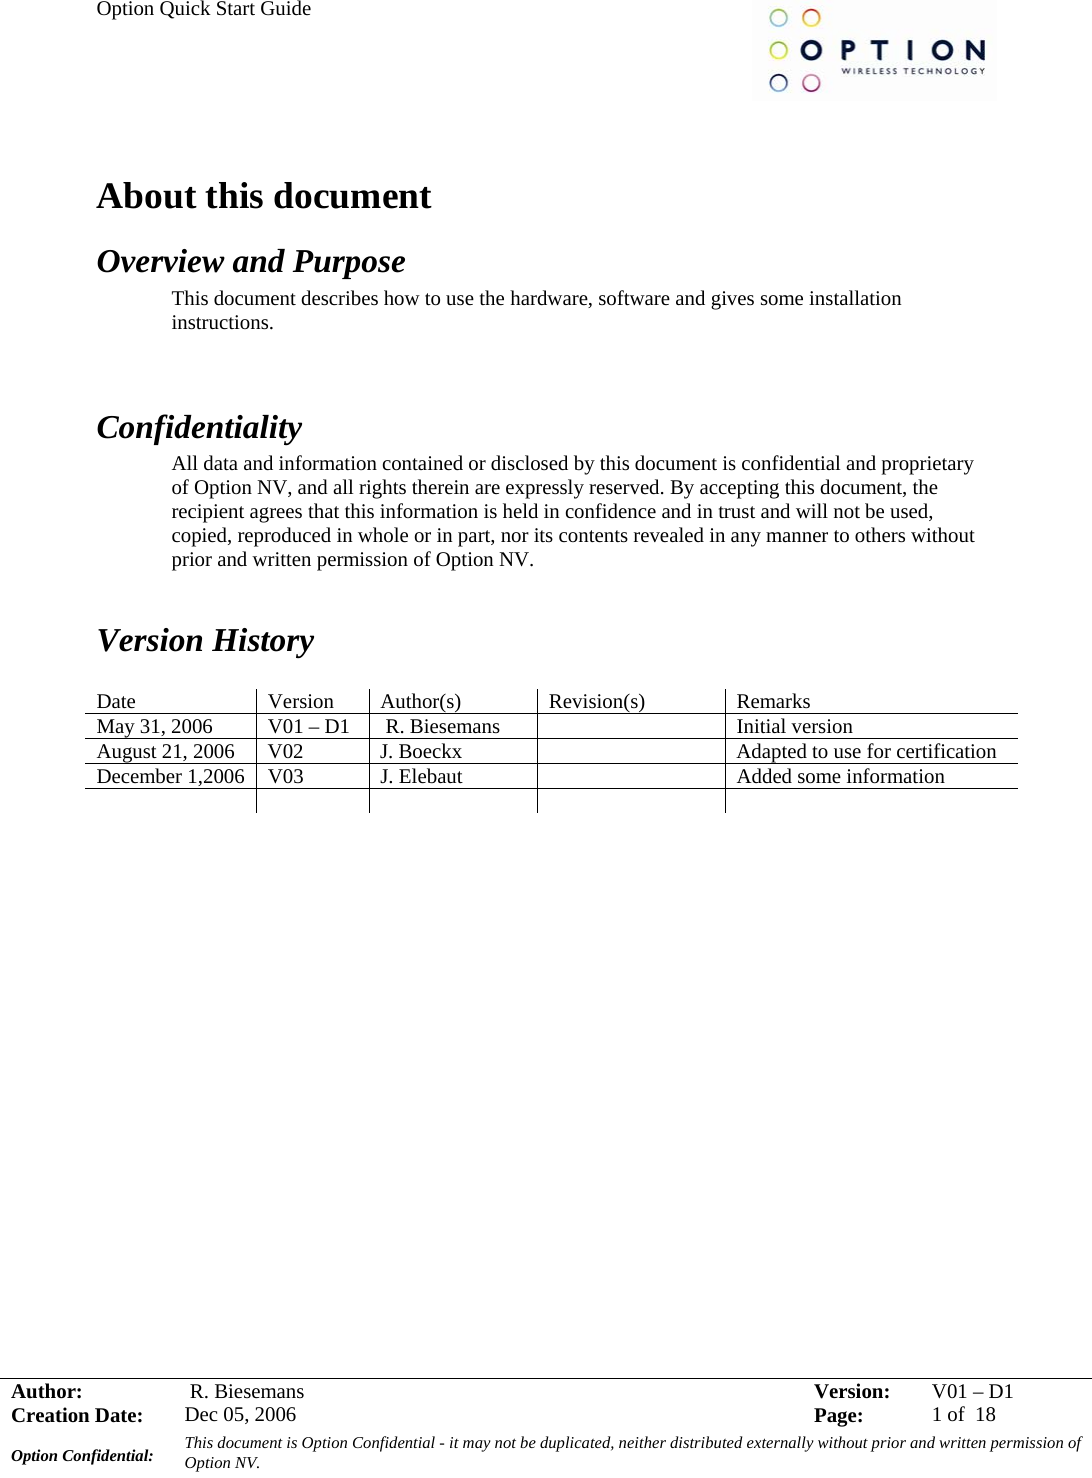 Option Quick Start Guide     Author:   R. Biesemans  Version:  V01 –D1Creation Date:  Dec 05, 2006    Page:  1 of  18 Option Confidential:  This document is Option Confidential - it may not be duplicated, neither distributed externally without prior and written permission of Option NV.    About this document Overview and Purpose This document describes how to use the hardware, software and gives some installation instructions.   Confidentiality All data and information contained or disclosed by this document is confidential and proprietary of Option NV, and all rights therein are expressly reserved. By accepting this document, the recipient agrees that this information is held in confidence and in trust and will not be used, copied, reproduced in whole or in part, nor its contents revealed in any manner to others without prior and written permission of Option NV.    Version History  Date Version Author(s) Revision(s) Remarks May 31, 2006  V01 – D1   R. Biesemans    Initial version August 21, 2006  V02  J. Boeckx    Adapted to use for certification December 1,2006  V03  J. Elebaut    Added some information                   